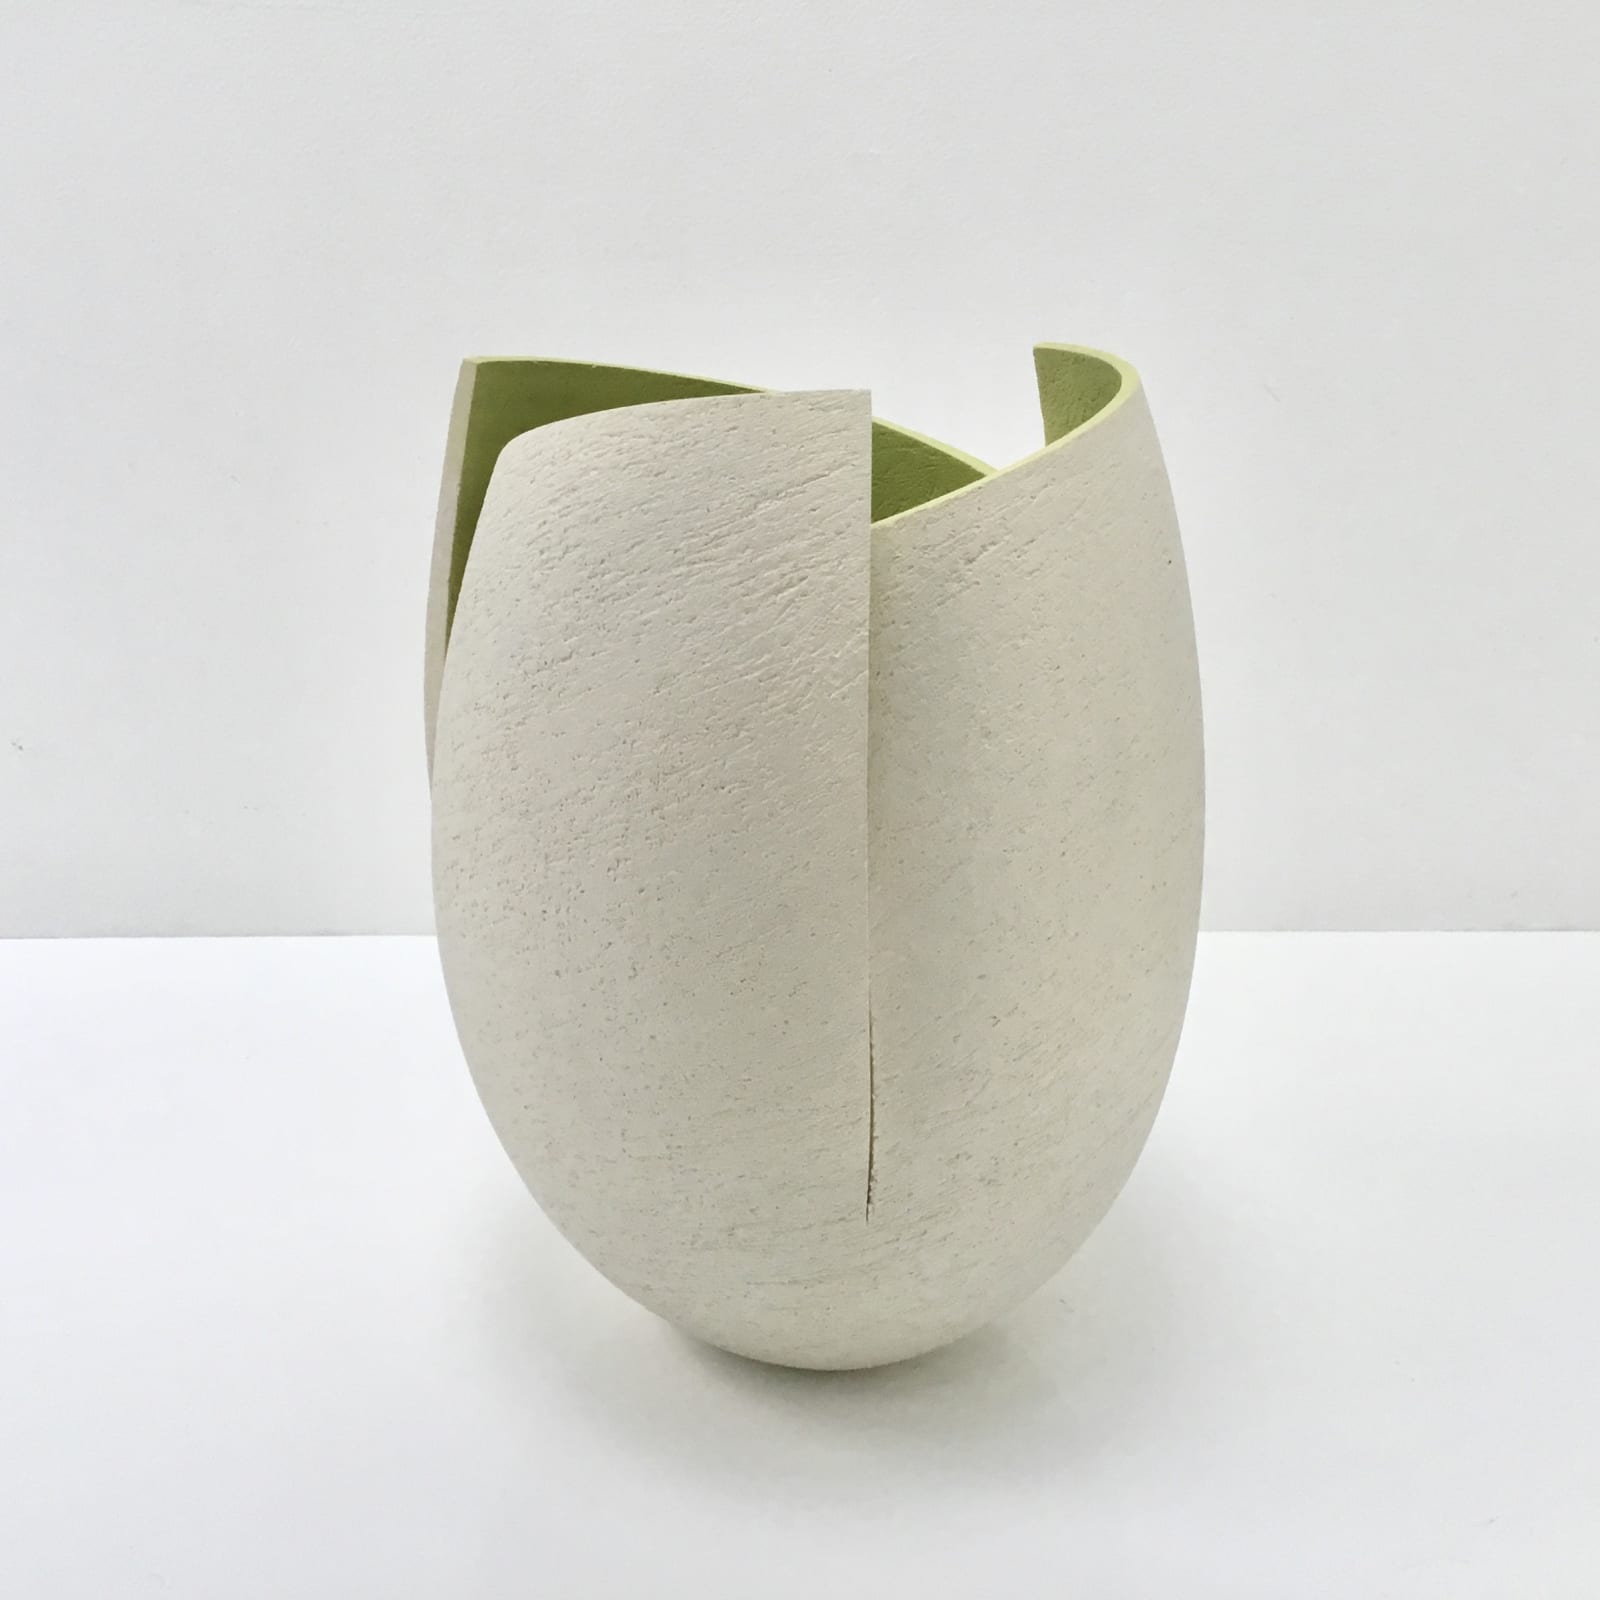 Ashraf Hanna, Light Grey Cut and Altered Vessel with Green , 2020